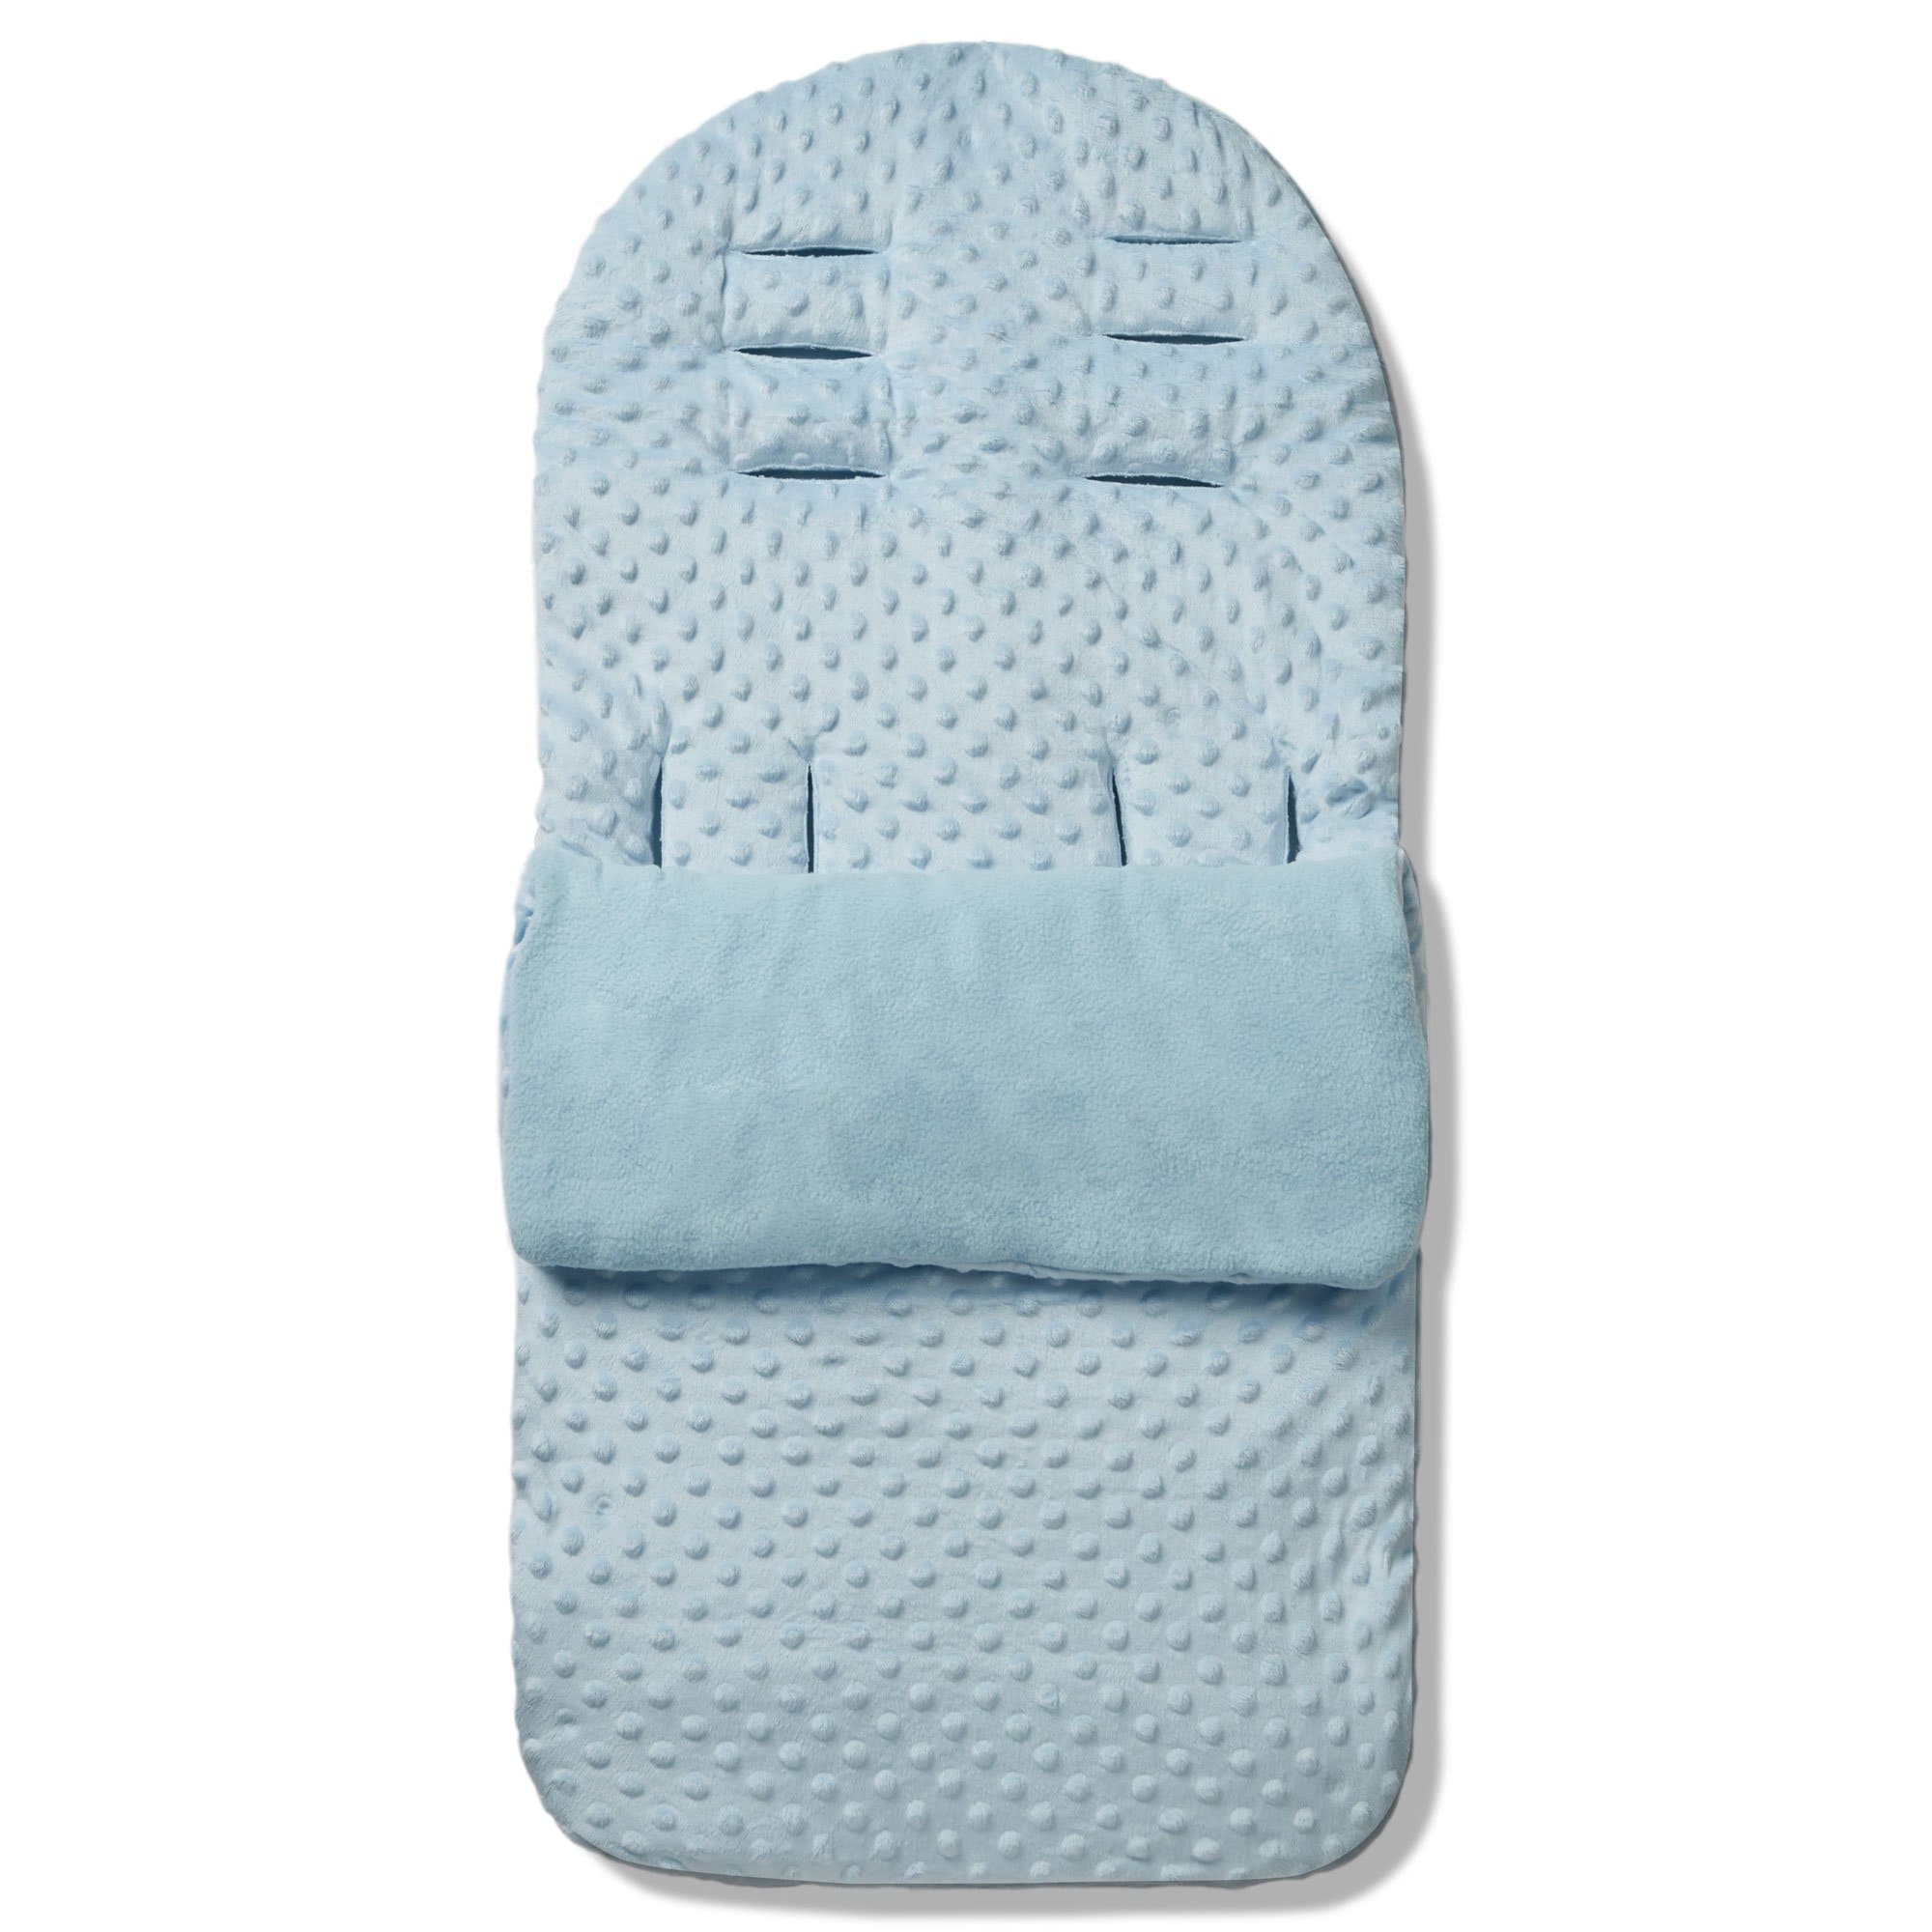 Dimple Footmuff / Cosy Toes Compatible with Red Castle - Blue / Fits All Models | For Your Little One